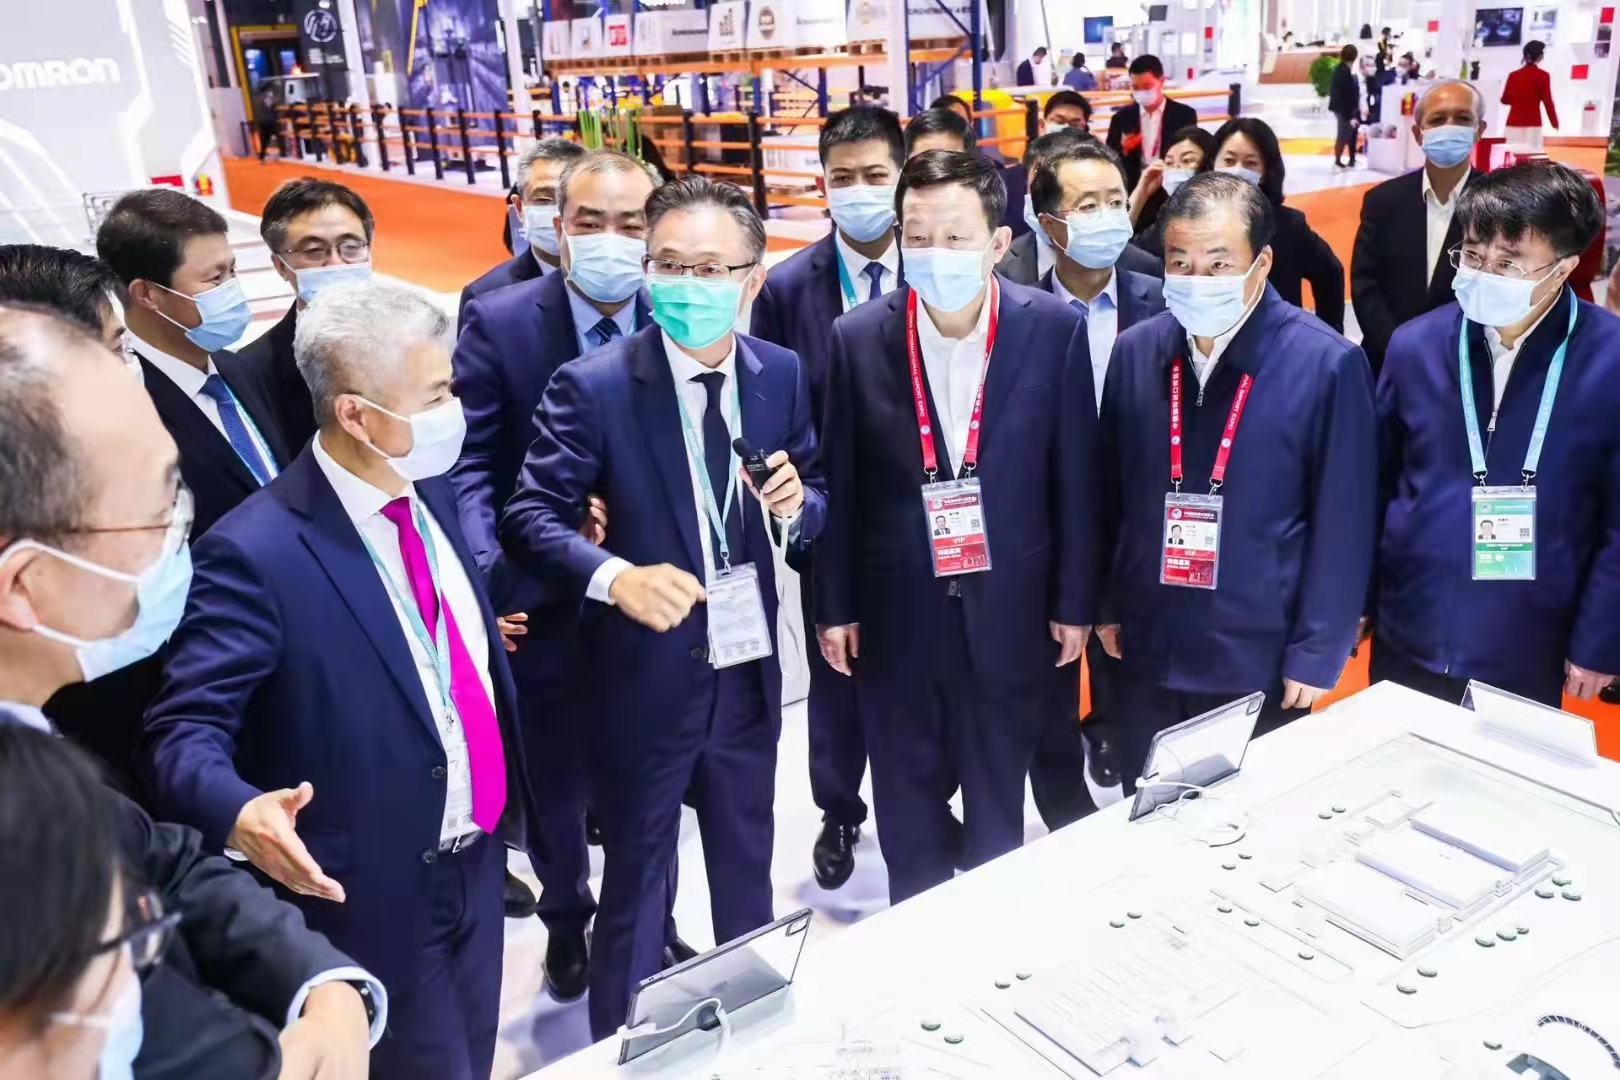 The fifth day of the China International Import Expo｜Suzhou Land Group